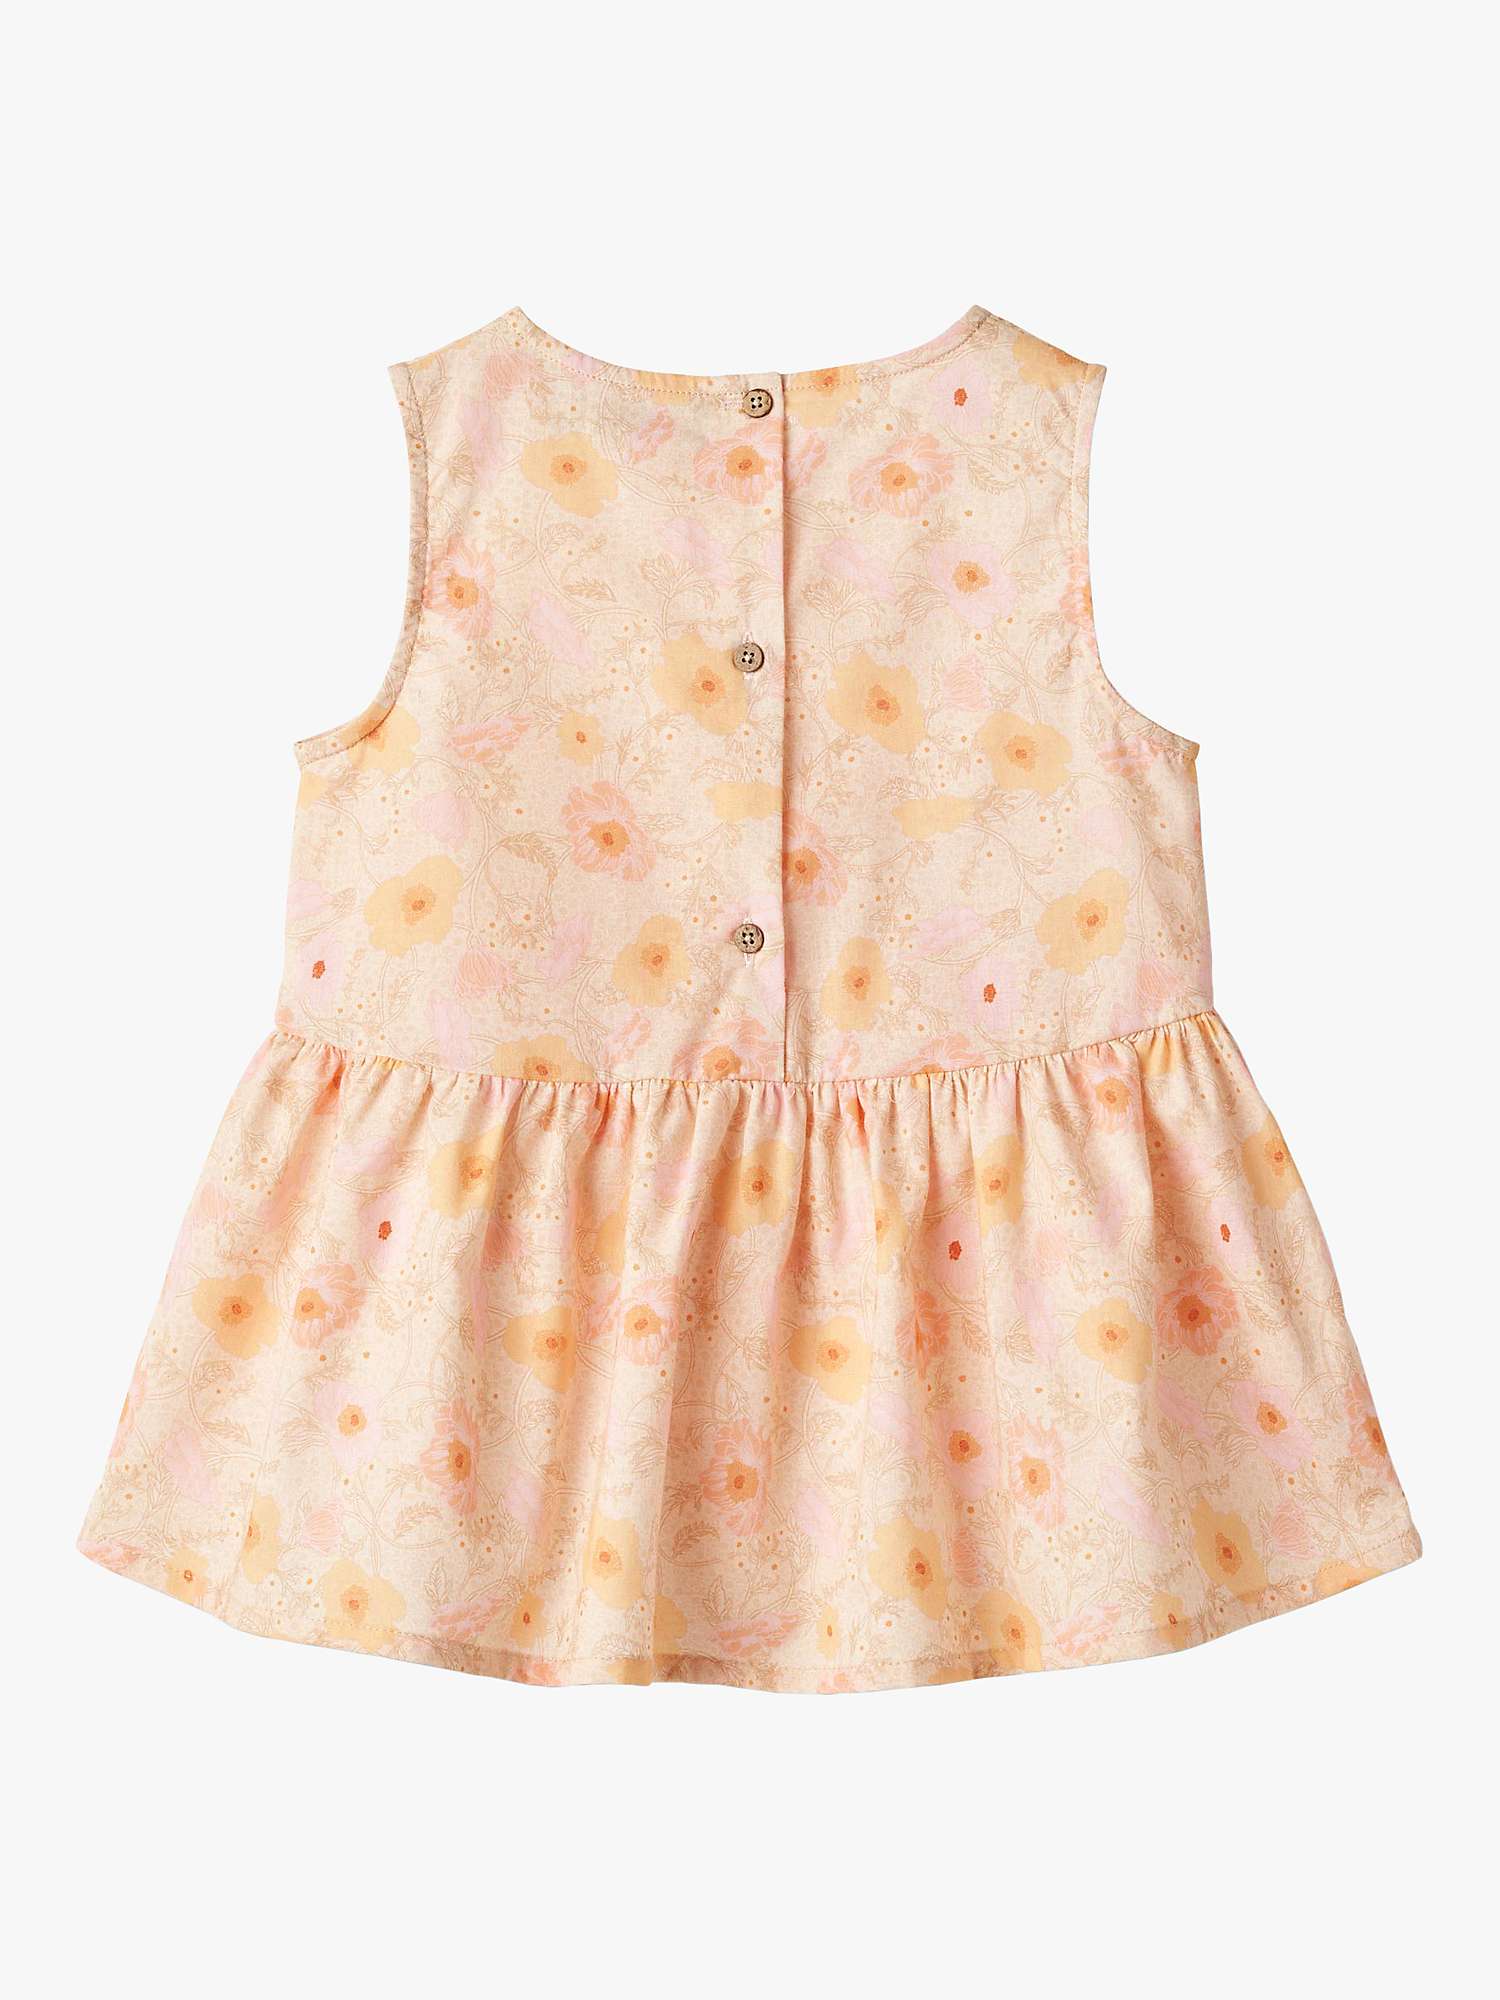 Buy WHEAT Kids' Bea Floral Top, Peach Online at johnlewis.com